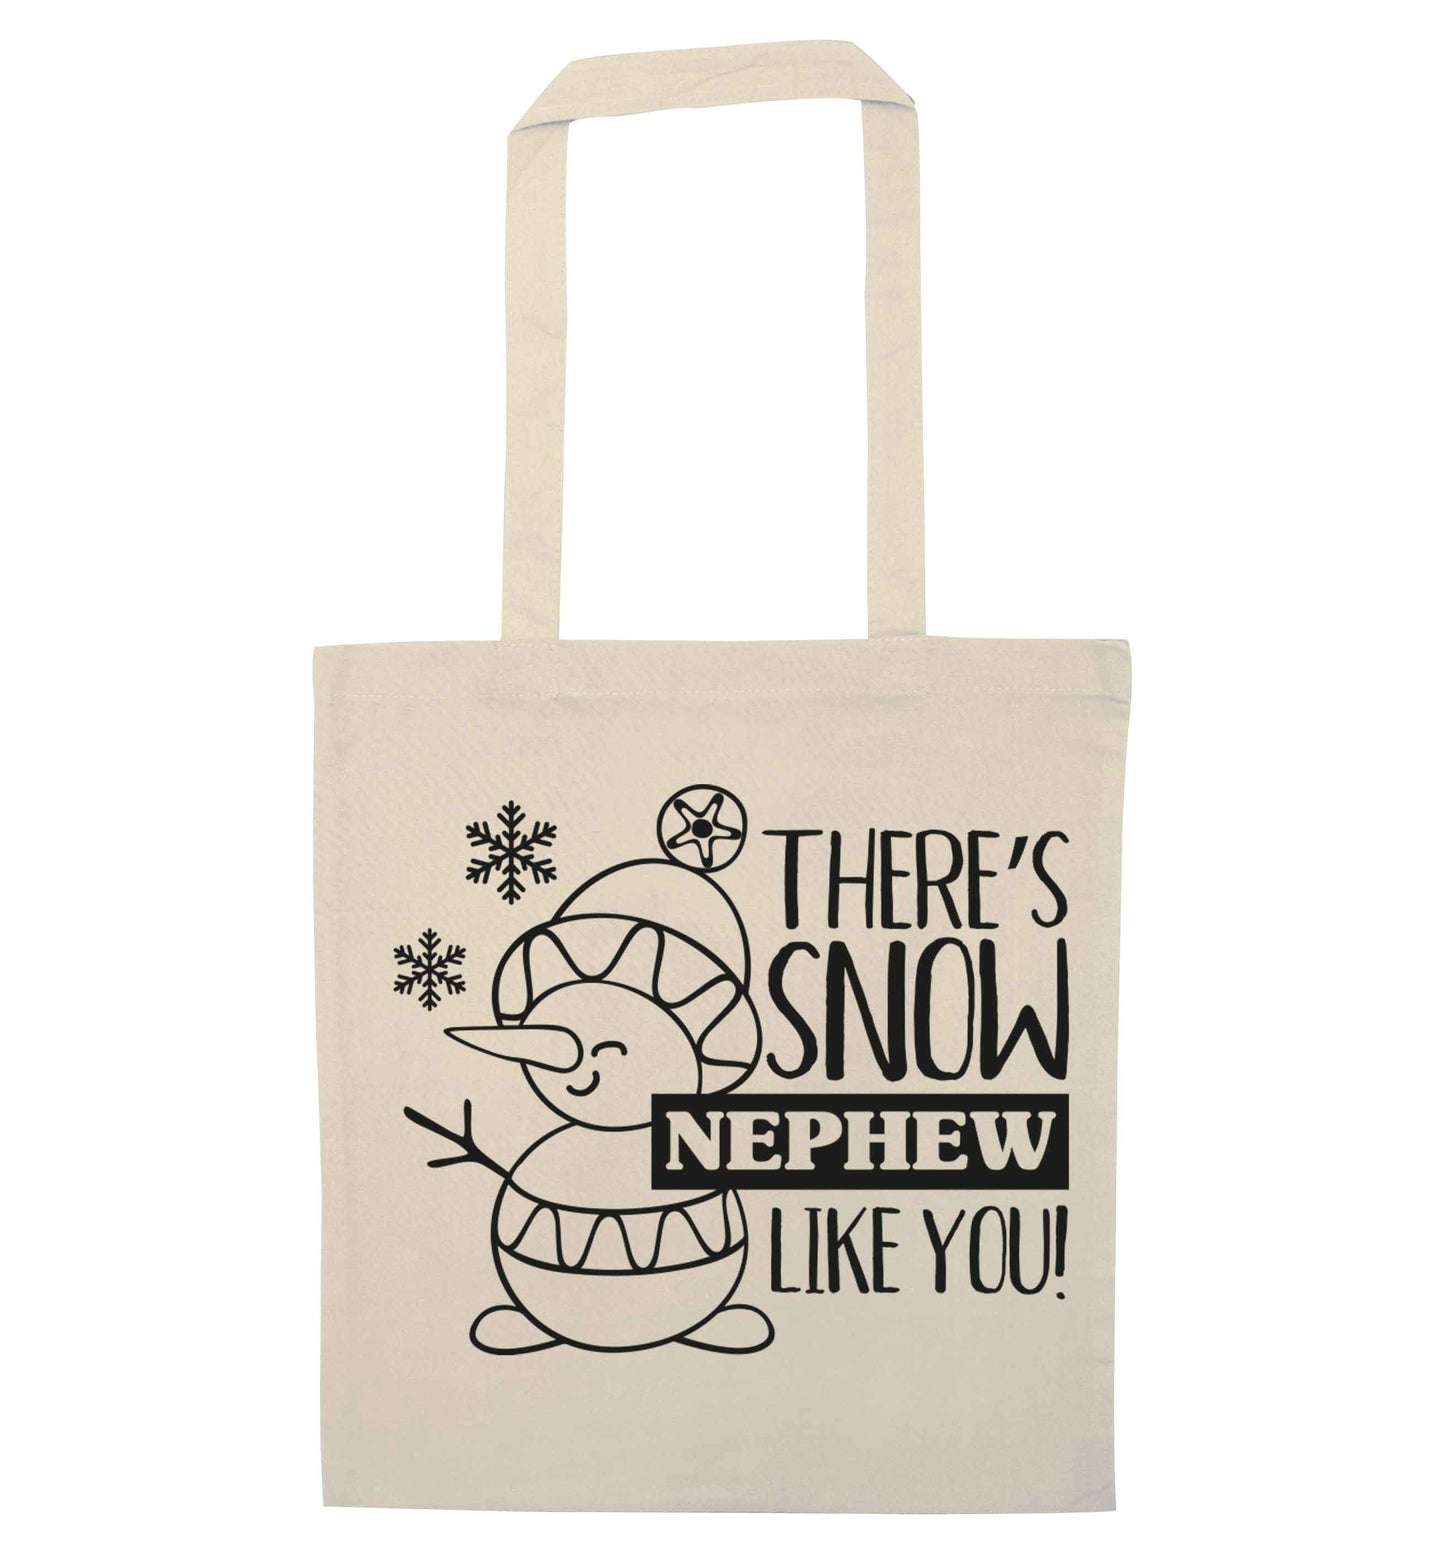 There's snow nephew like you natural tote bag